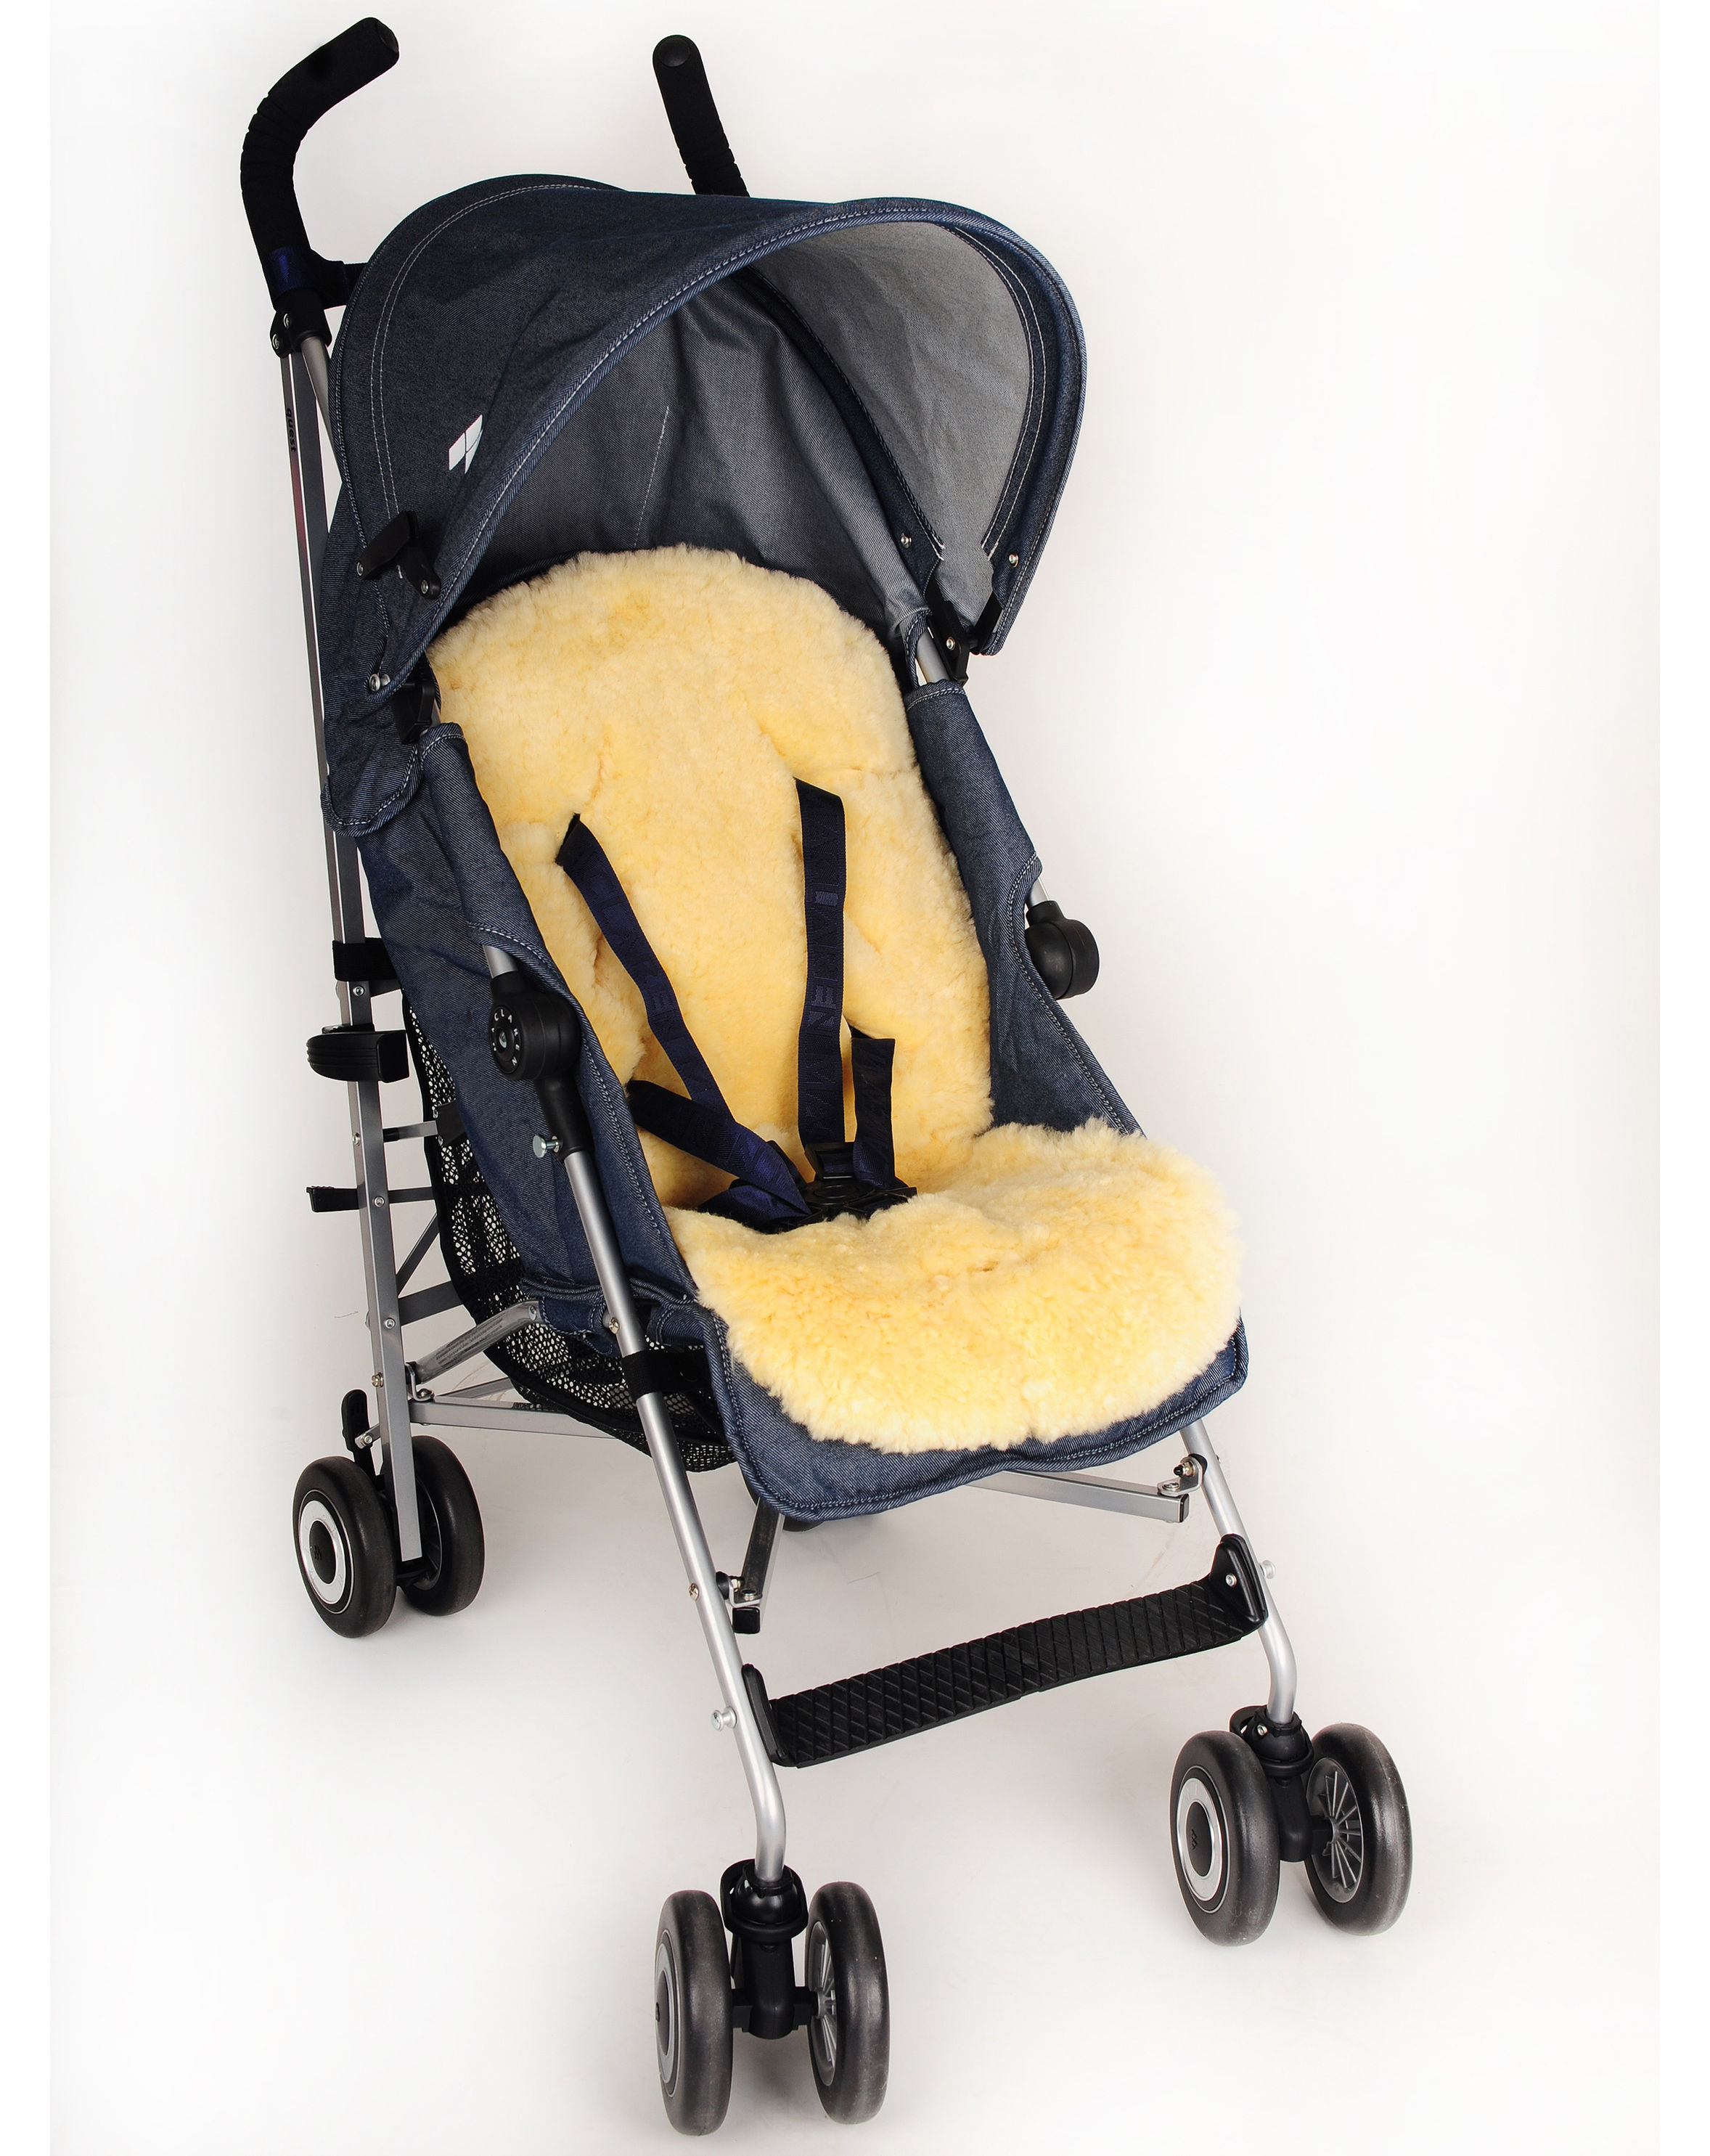 Buggy-Fußsack THERMO SHEEPY in black kaufen | tausendkind.at